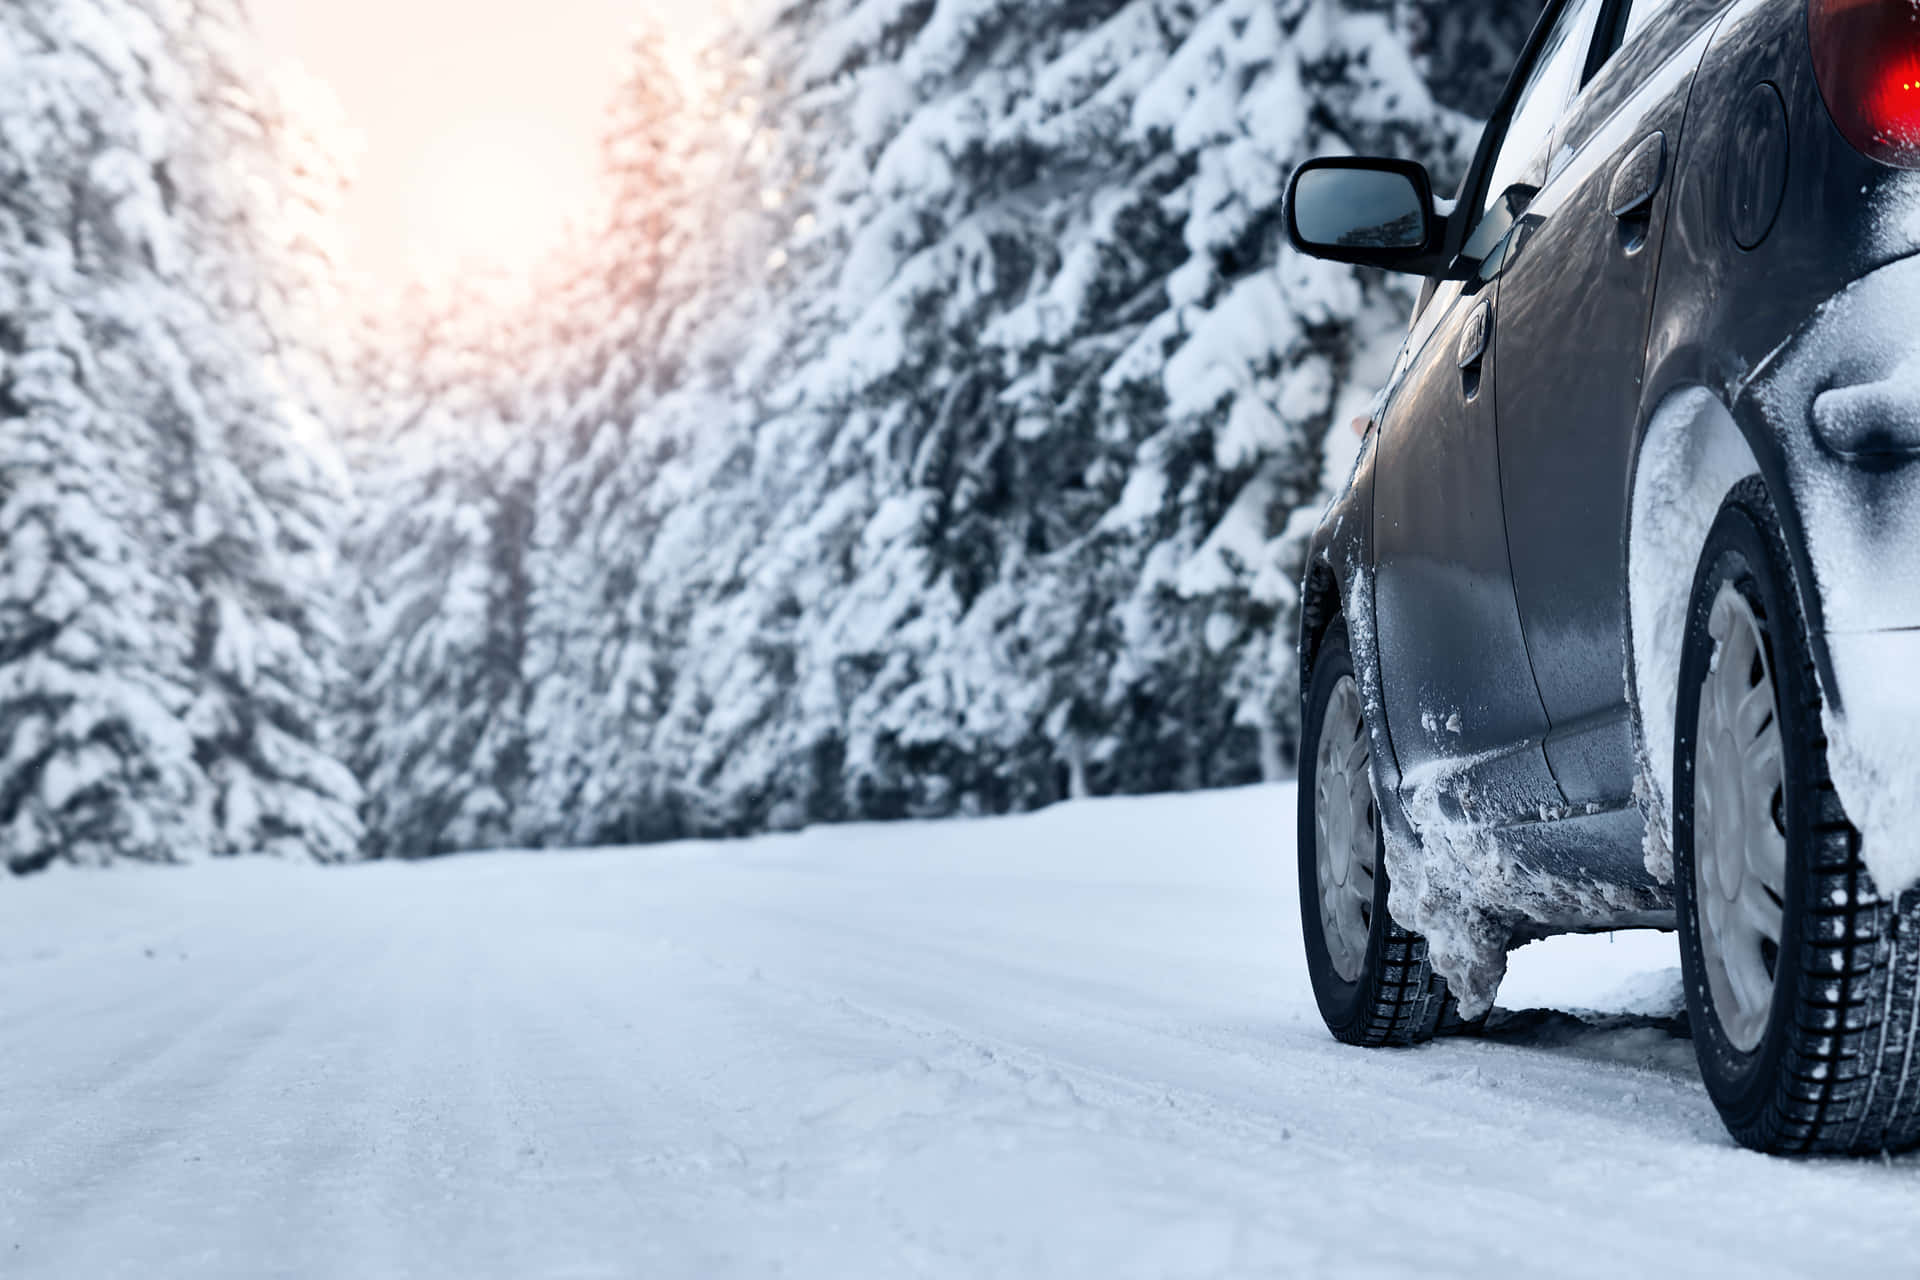 Snowy winter road with a vehicle driving in challenging conditions Wallpaper